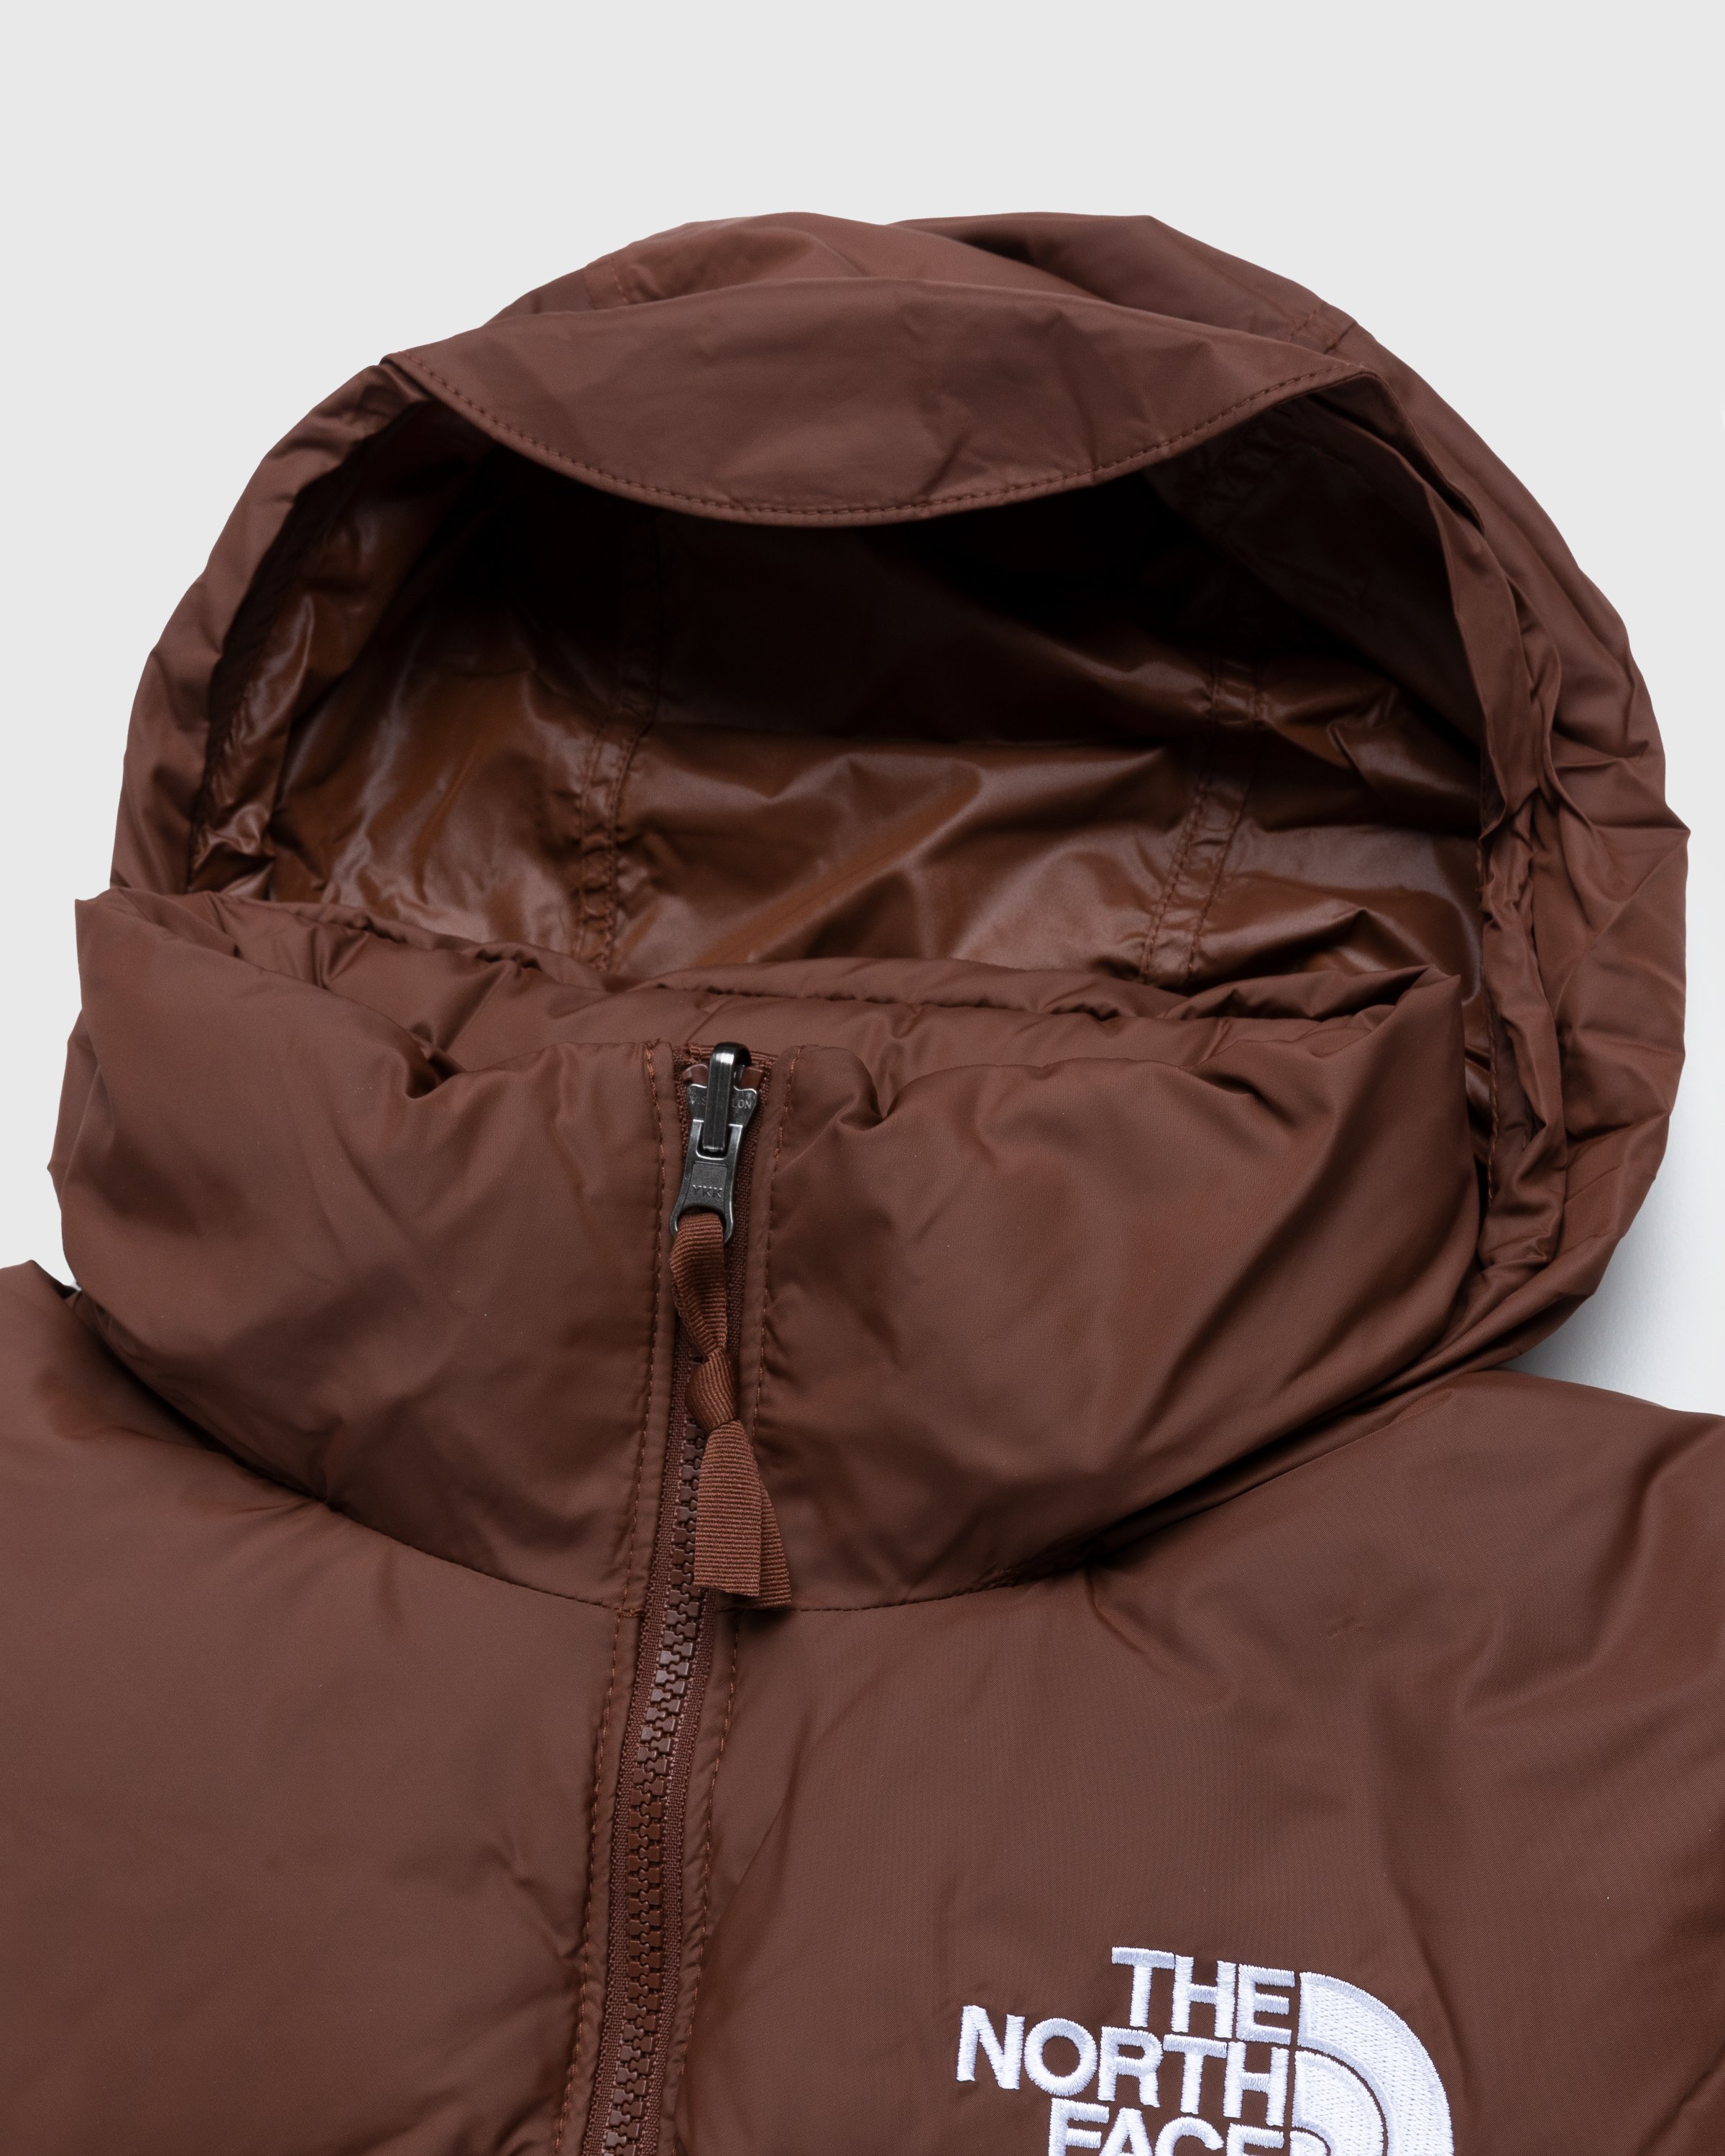 The North Face - Insulated Himalayan Vest Dark Oak - Clothing - Beige - Image 3